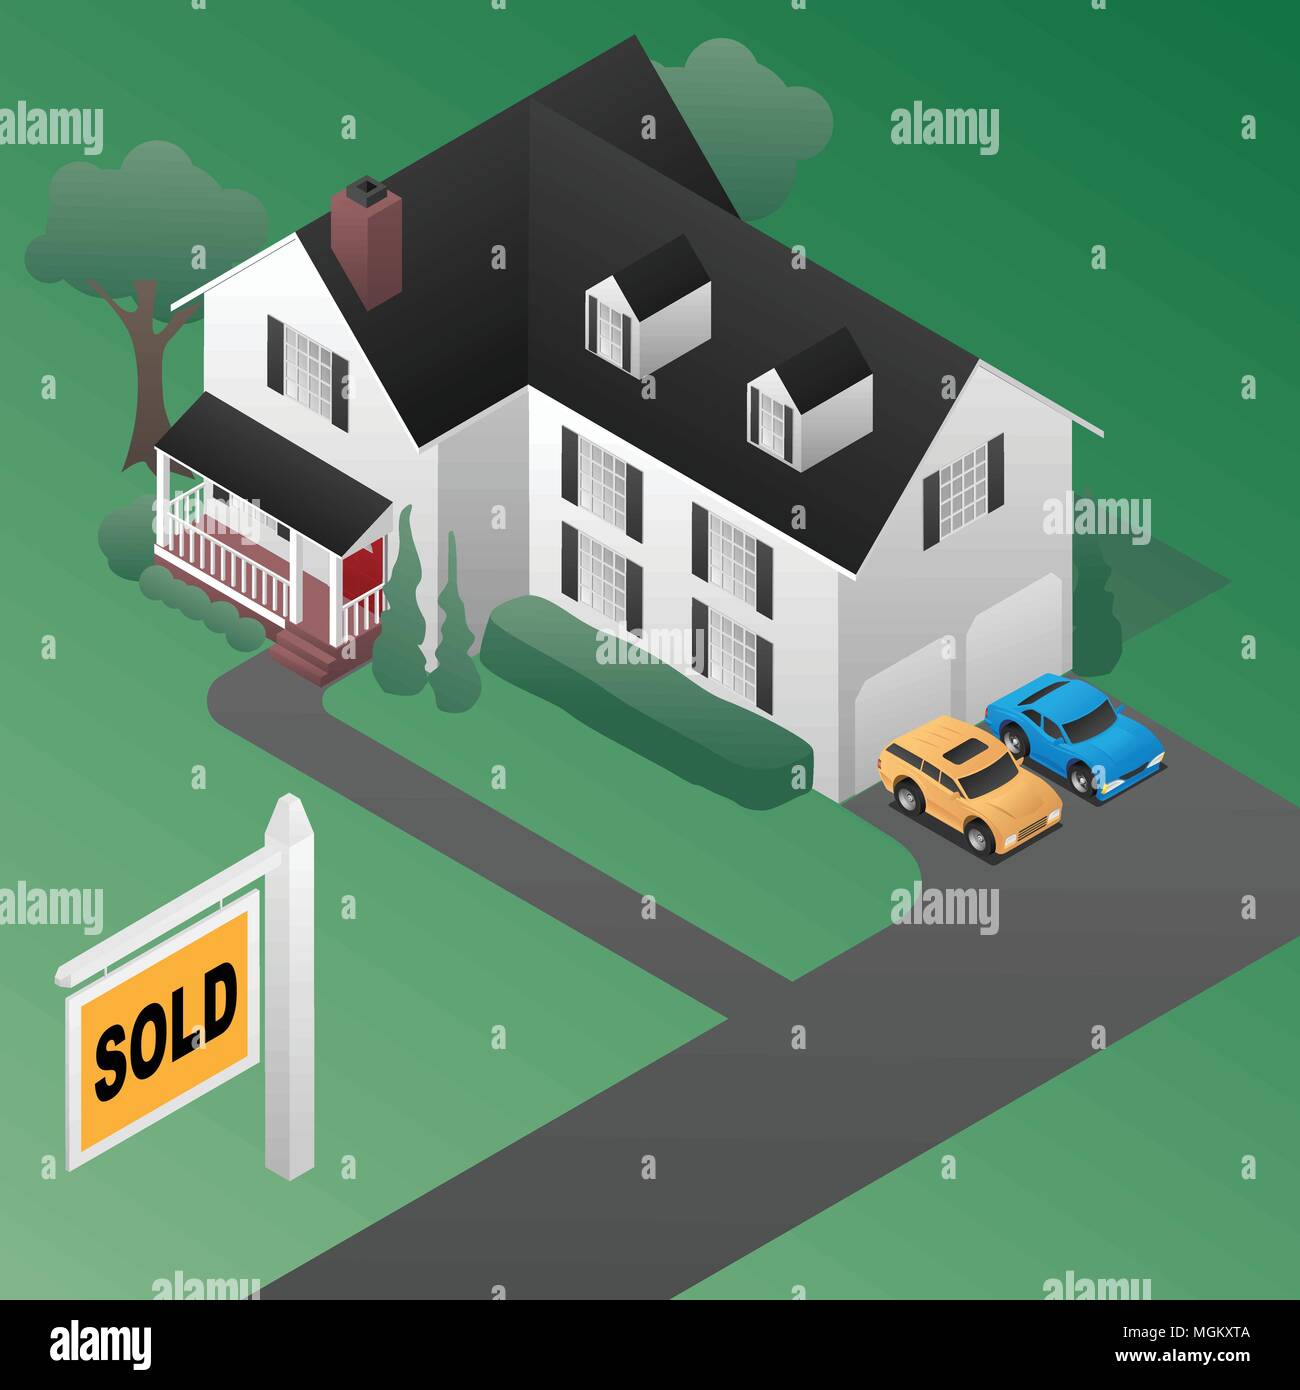 Real Estate Sold Sign with House Isometric 3d Style Vector Illustration Stock Vector